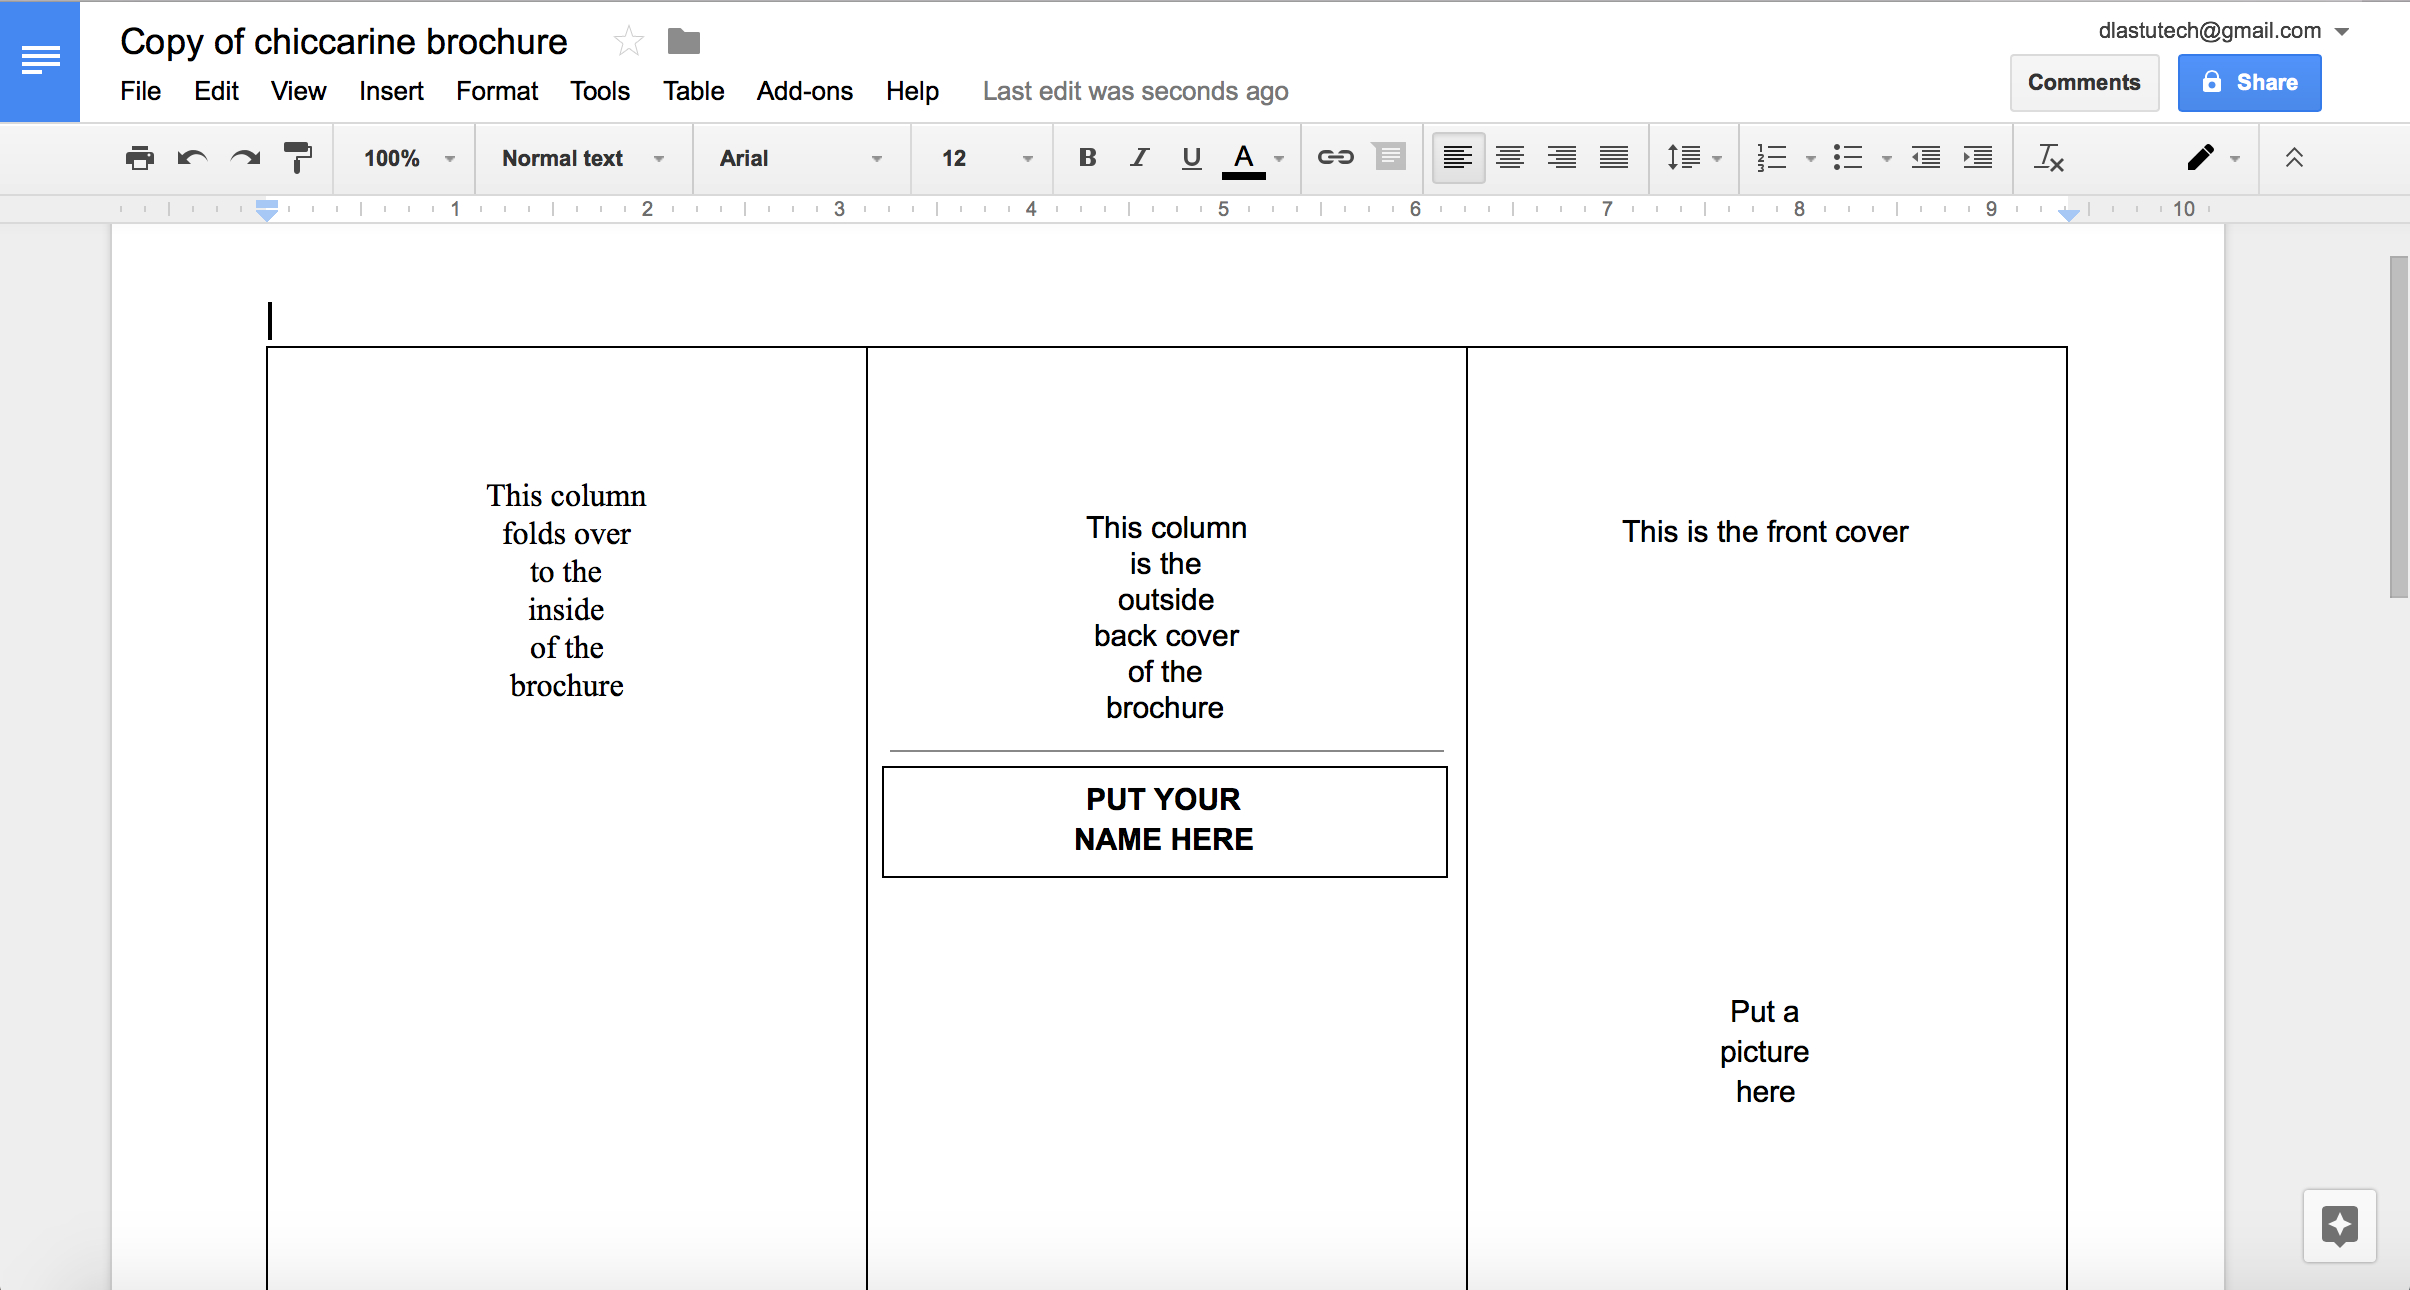 How To Make A Trifold Brochure In Google Docs - Karan Within Brochure Templates For Google Docs